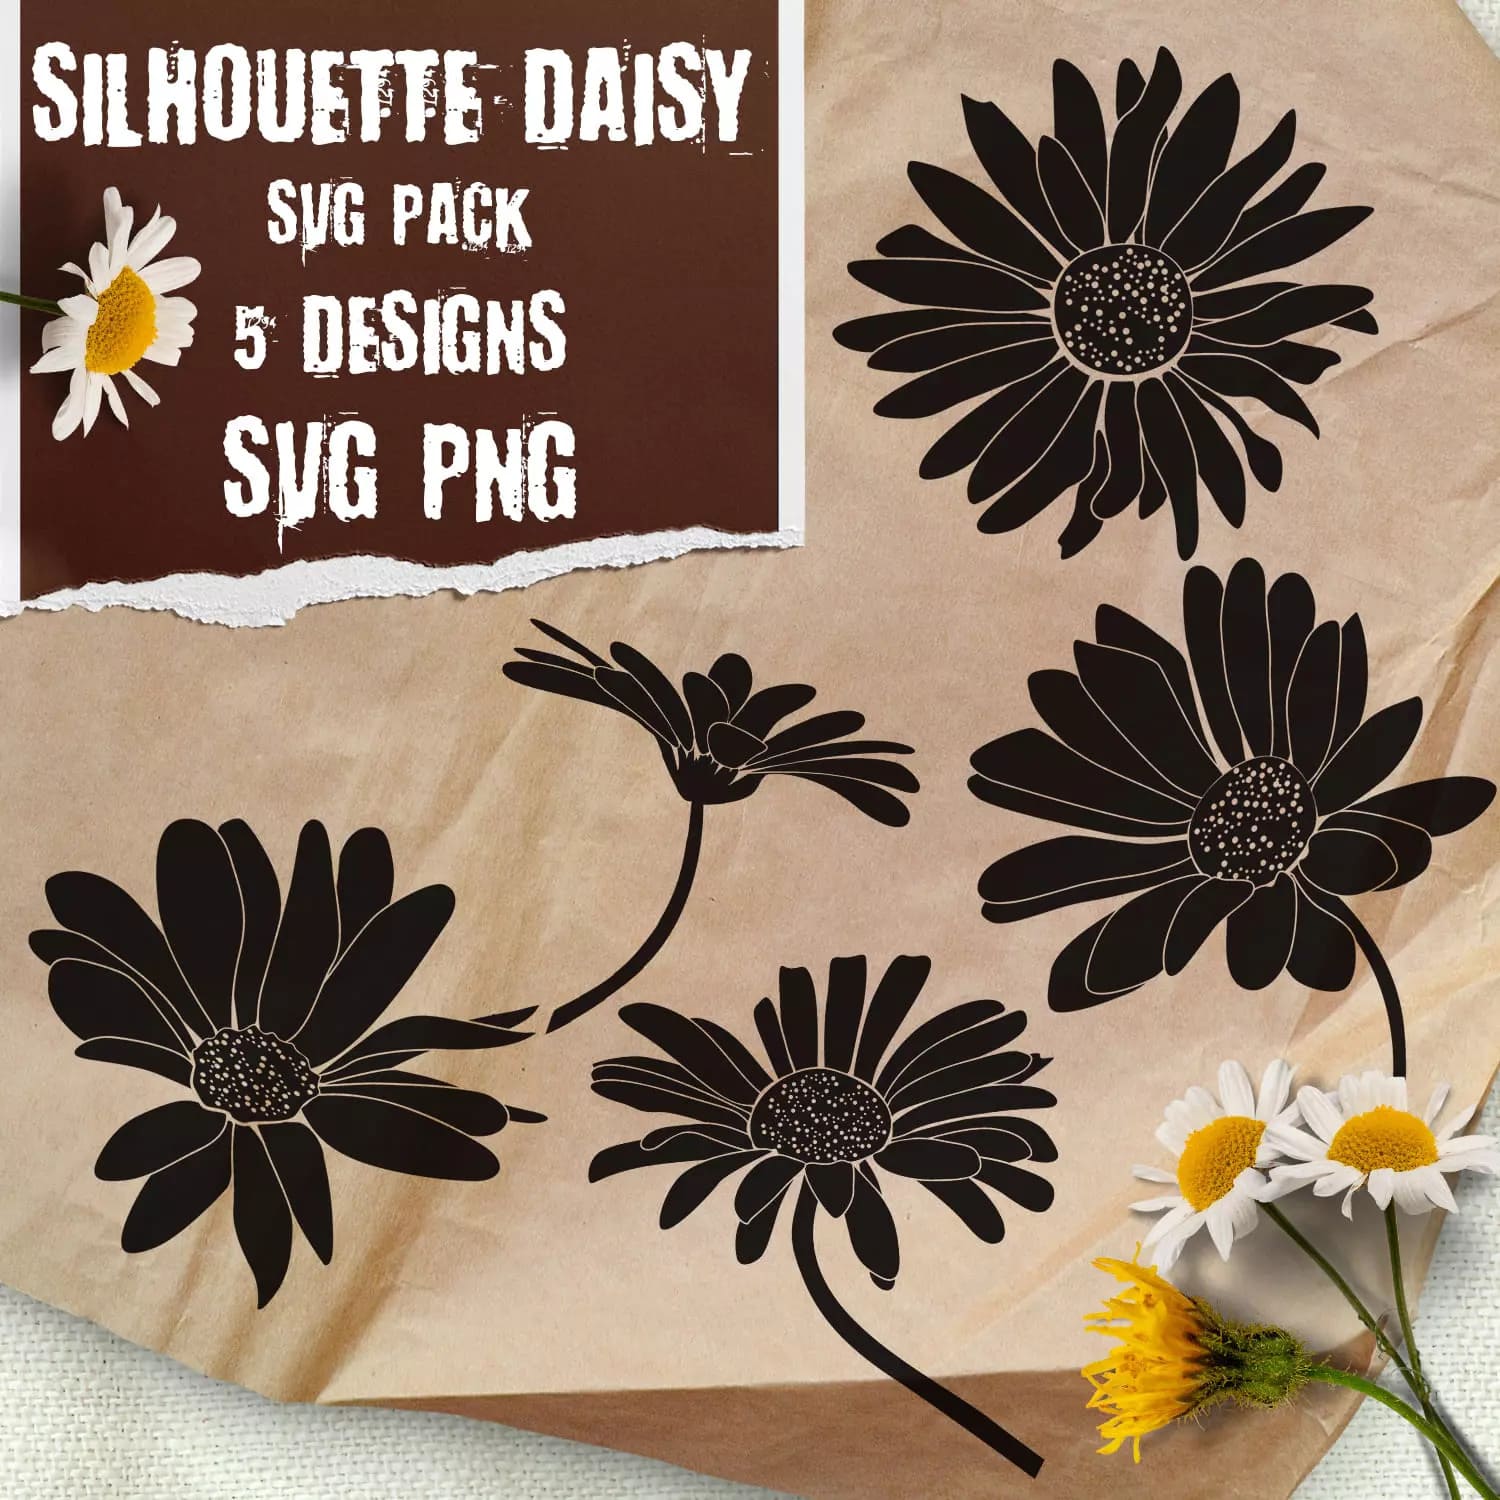 Silhouette Daisy SVG Preview 4.